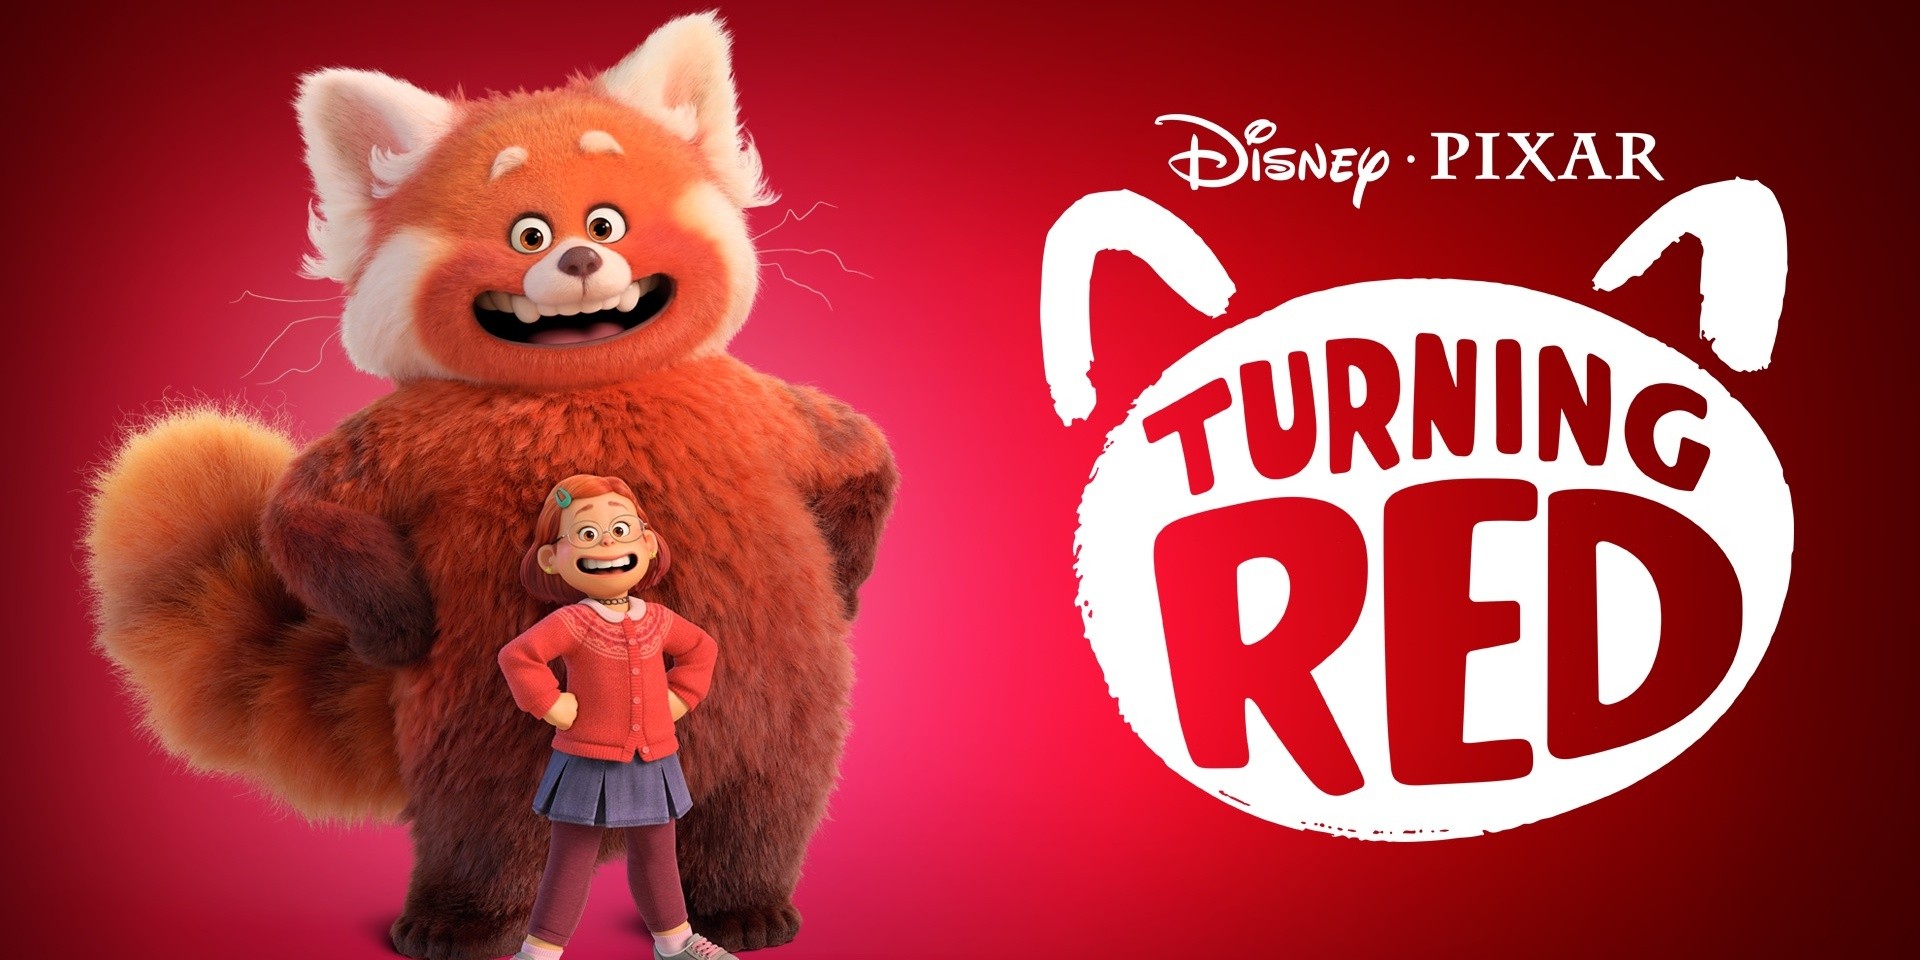 Disney and Pixar's 'Turning Red' to premiere exclusively on Disney+ this Friday